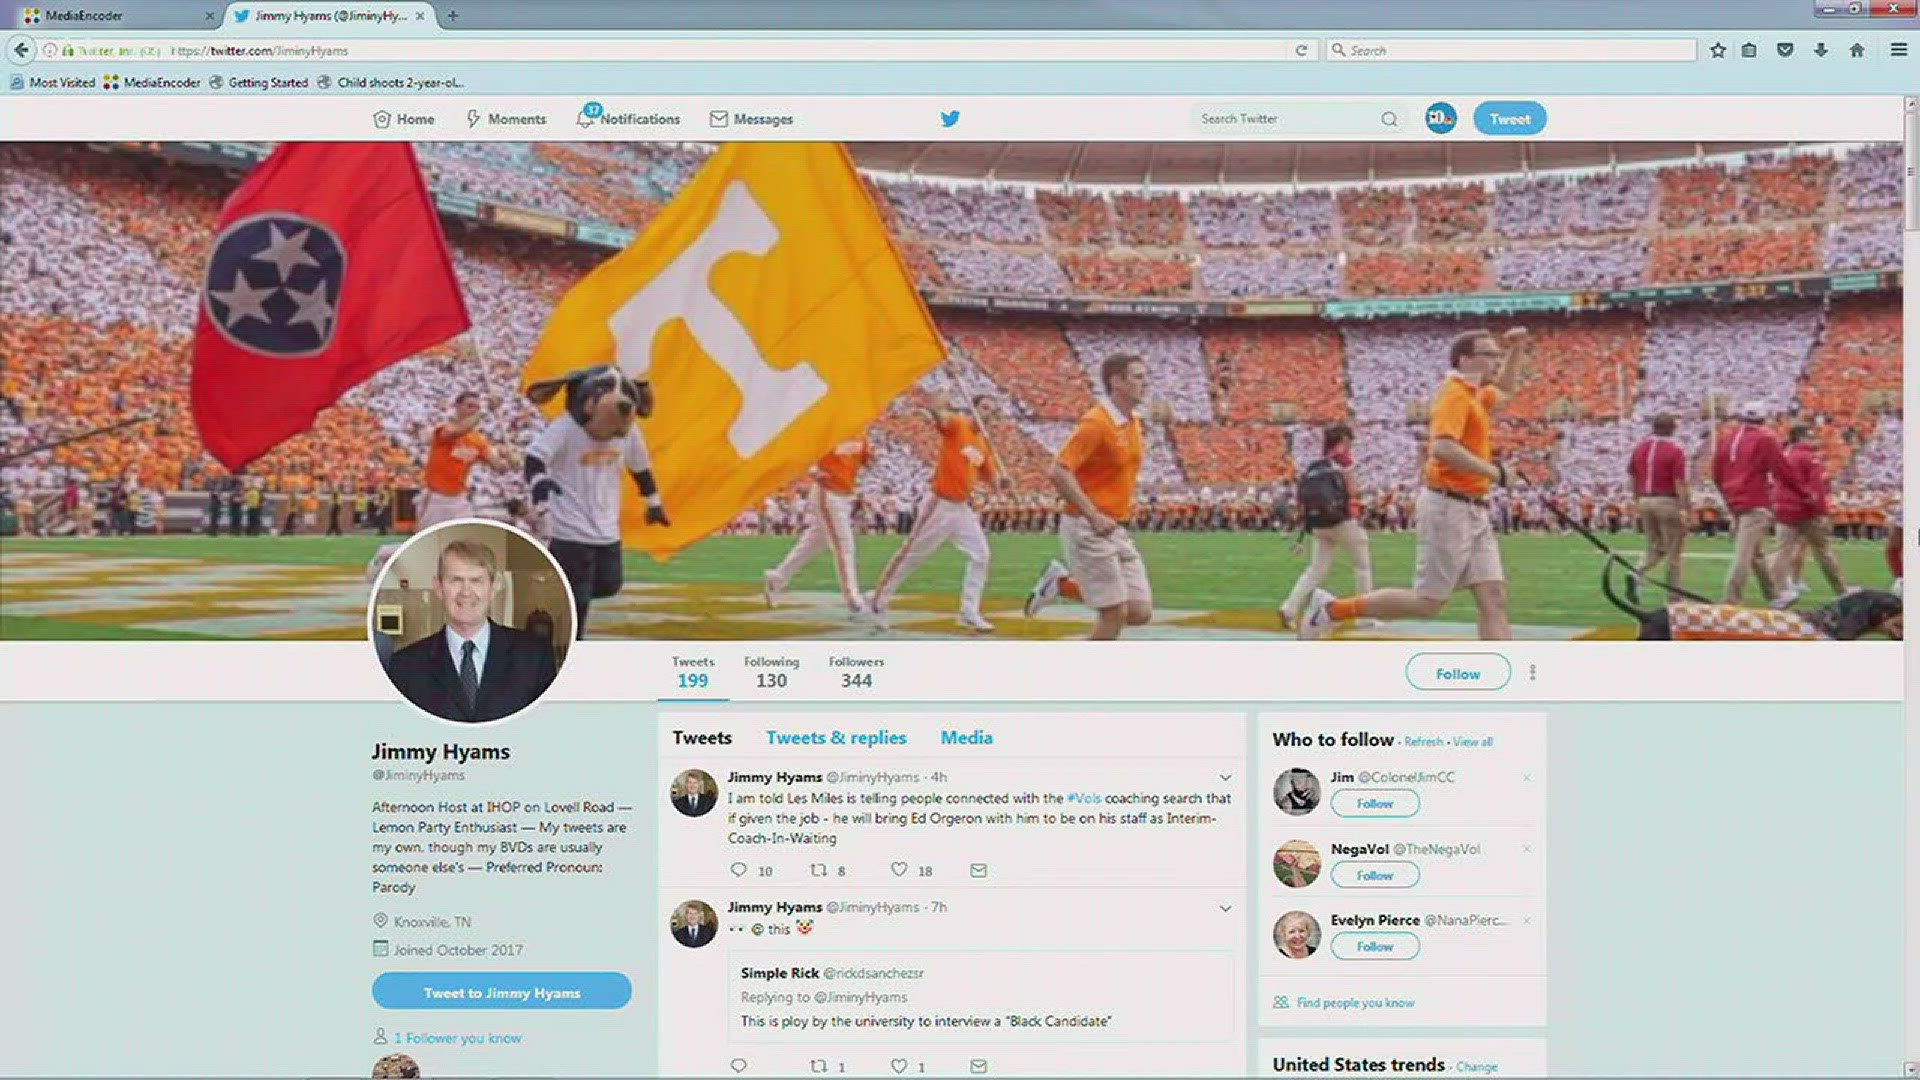 Nov. 30, 2017: Vols football bans, players and even reporters have been on edge throughout the coaching search. The information and misinformation spreading online has been fueling the frenzy.